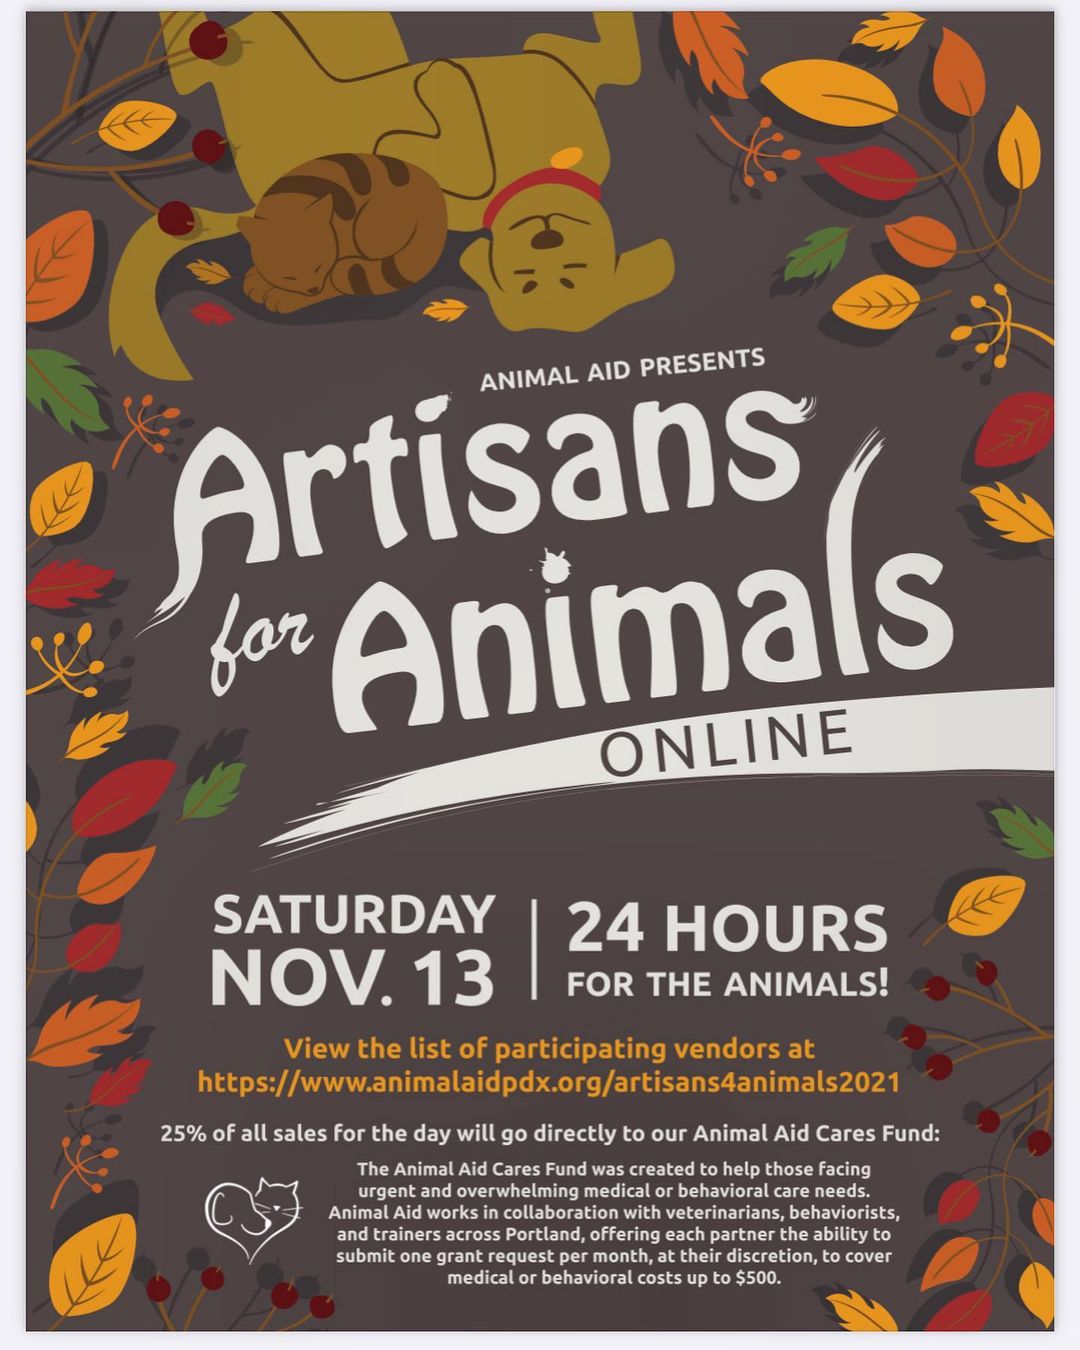 Artisans for Animals!
•
•
24 hours for the animals, tomorrow, Saturday, November 13th! Join us online to support our vendors as they give back 25% of their sales that day for our emergency care fund! For a list of vendors you can visit our website: animalaidpdx.org and click on the events tab! Get your holiday shopping done early! It’s a win-win!